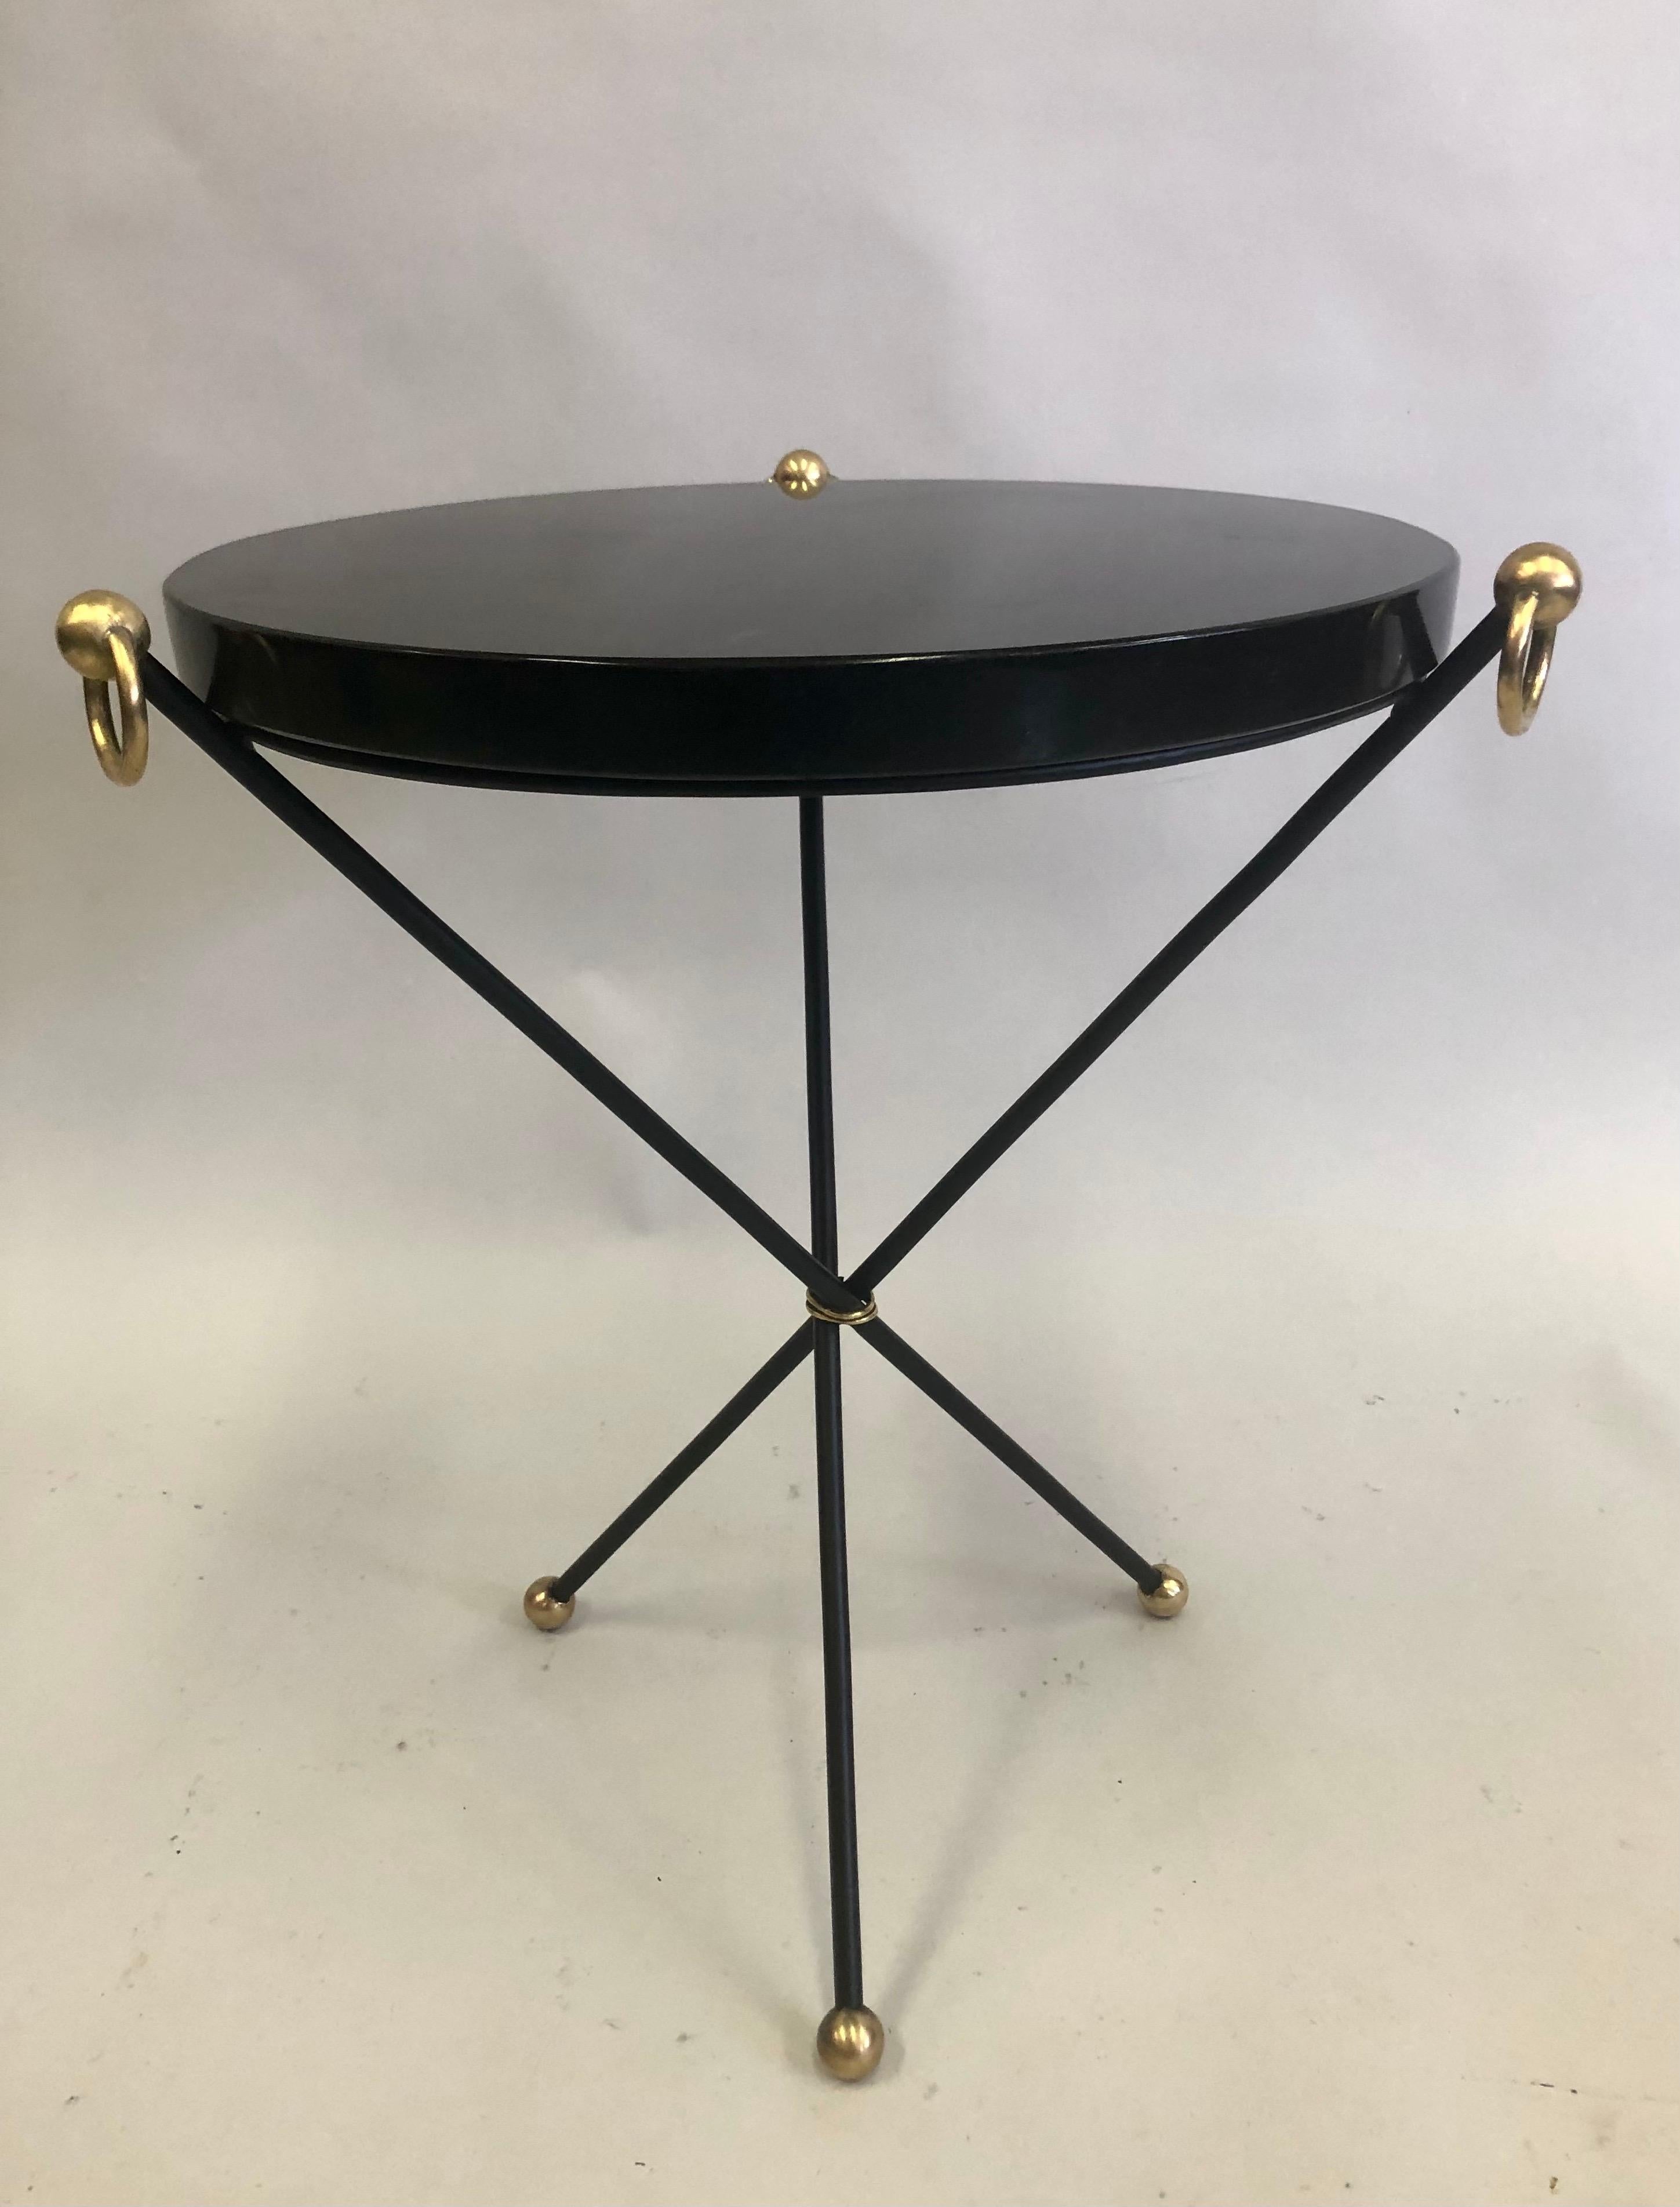 Elegant French Mid-Century Modern neoclassical Guerdon, side or end table attributed to Jacques Adnet.
The table is set in a classic tripod form in enameled wrought iron with an deeply inset mottled black stone top. Rich polished brass ball feet, 3